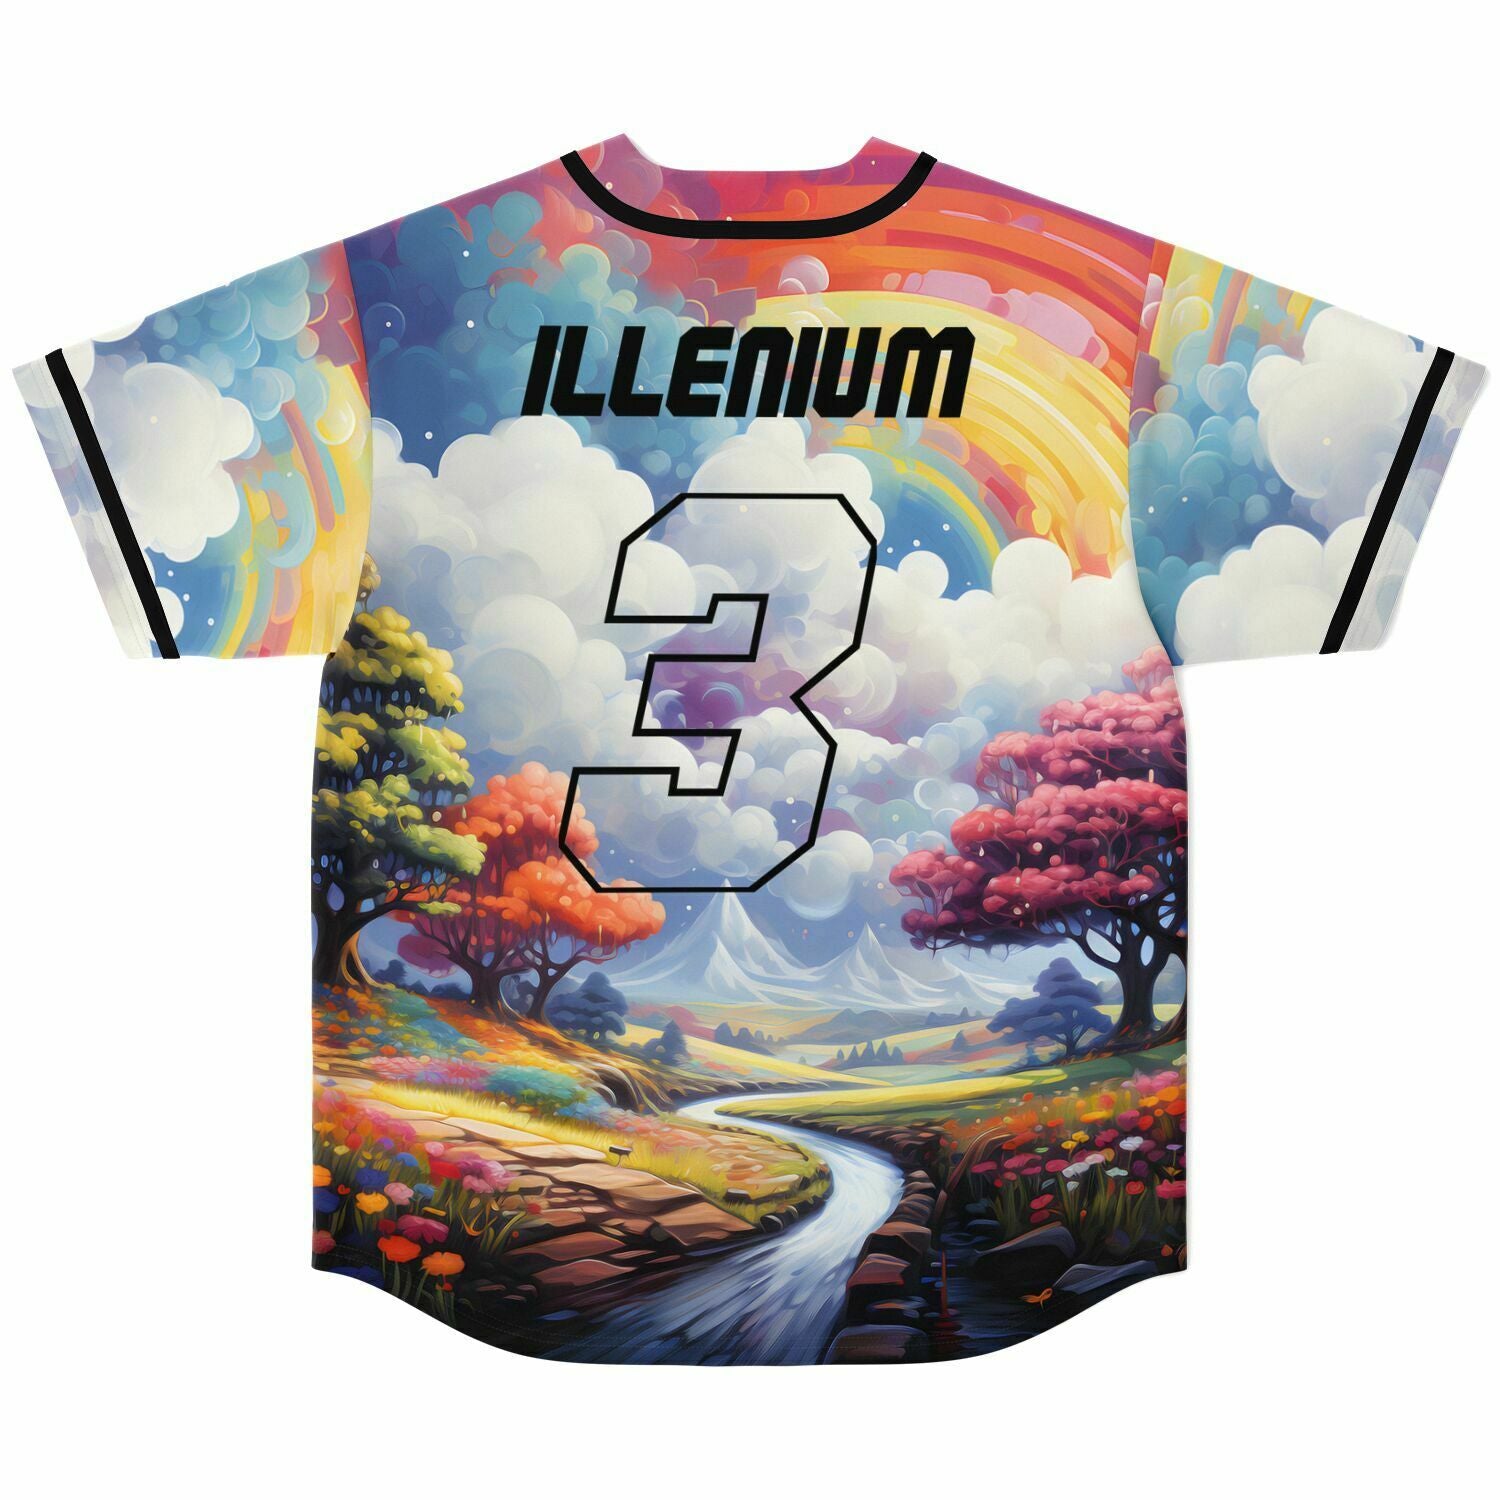 A Jennifer custom Baseball Jersey with the number 3